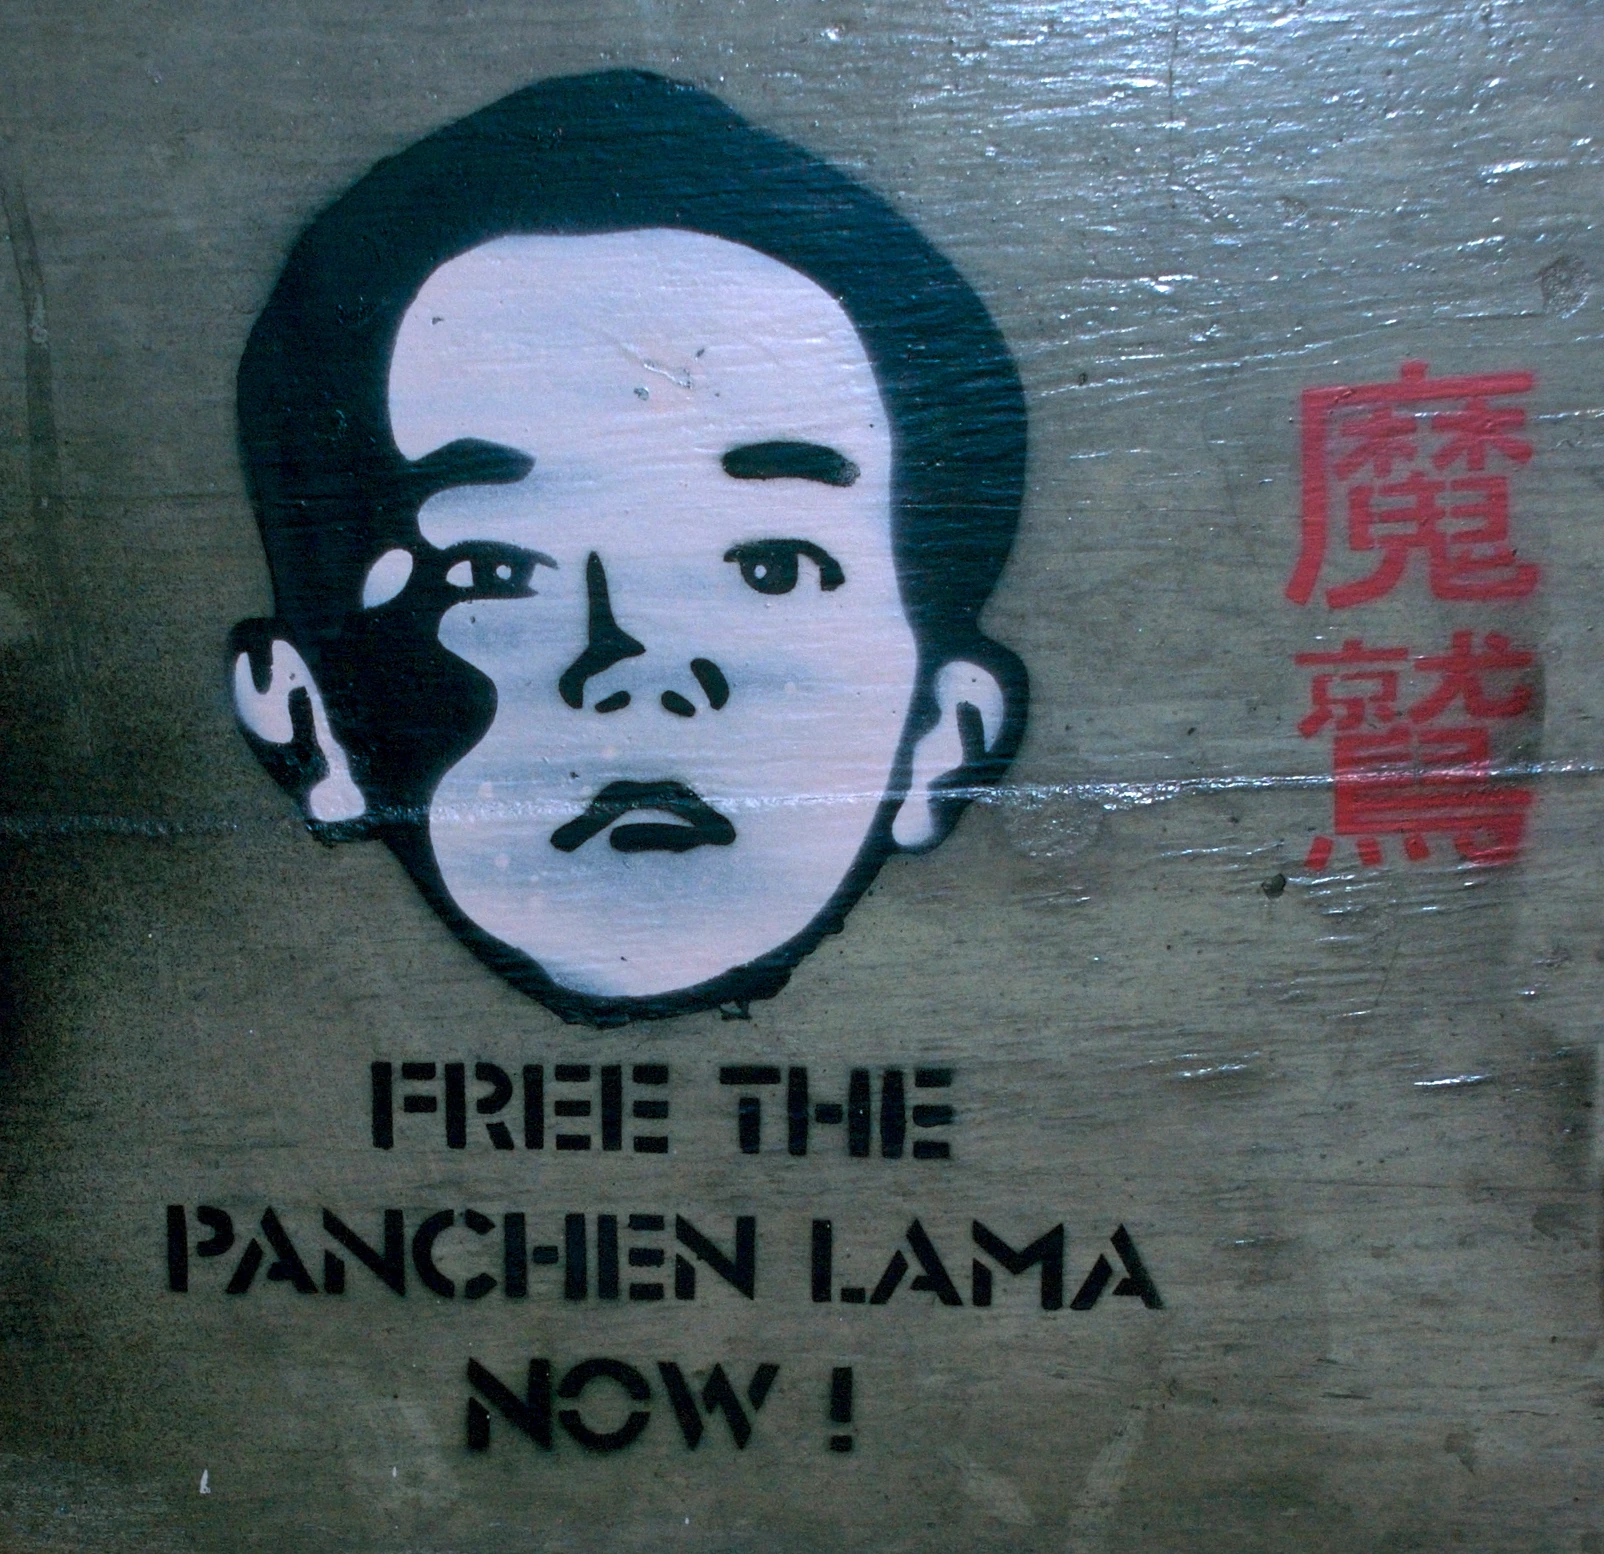 Who is Panchen Lama